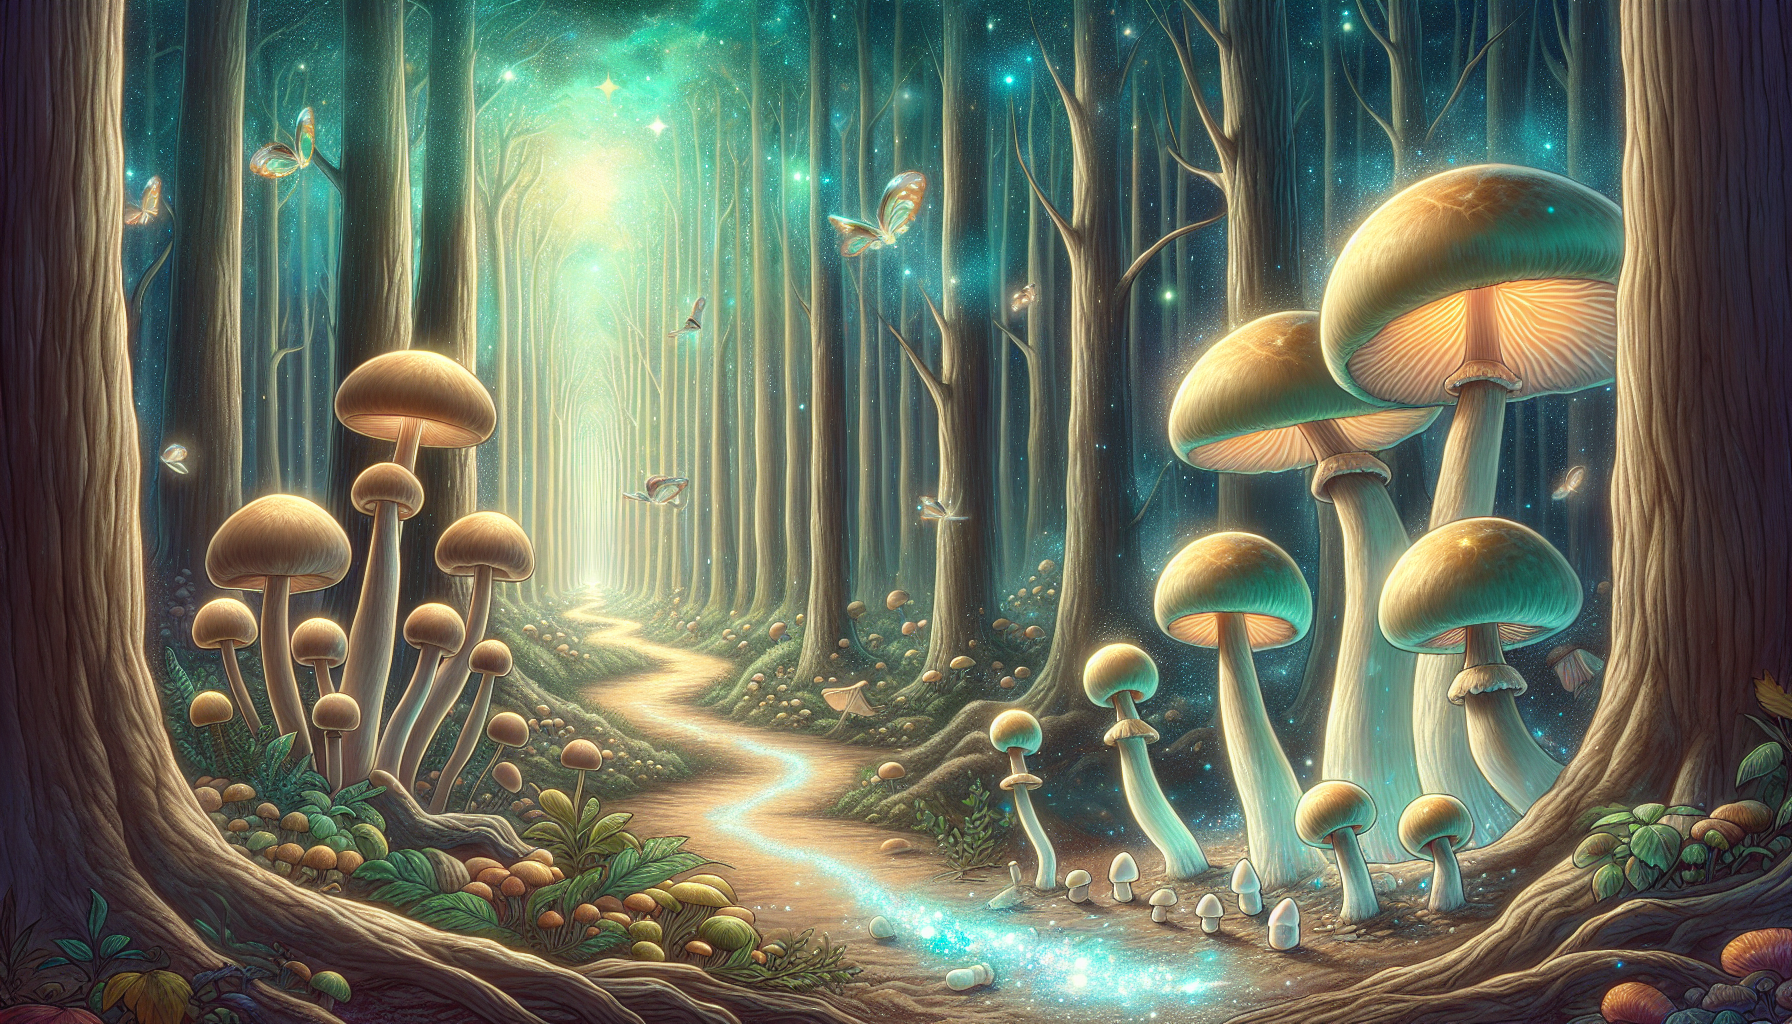 Artistic depiction of dosing guidelines for magic mushroom experience